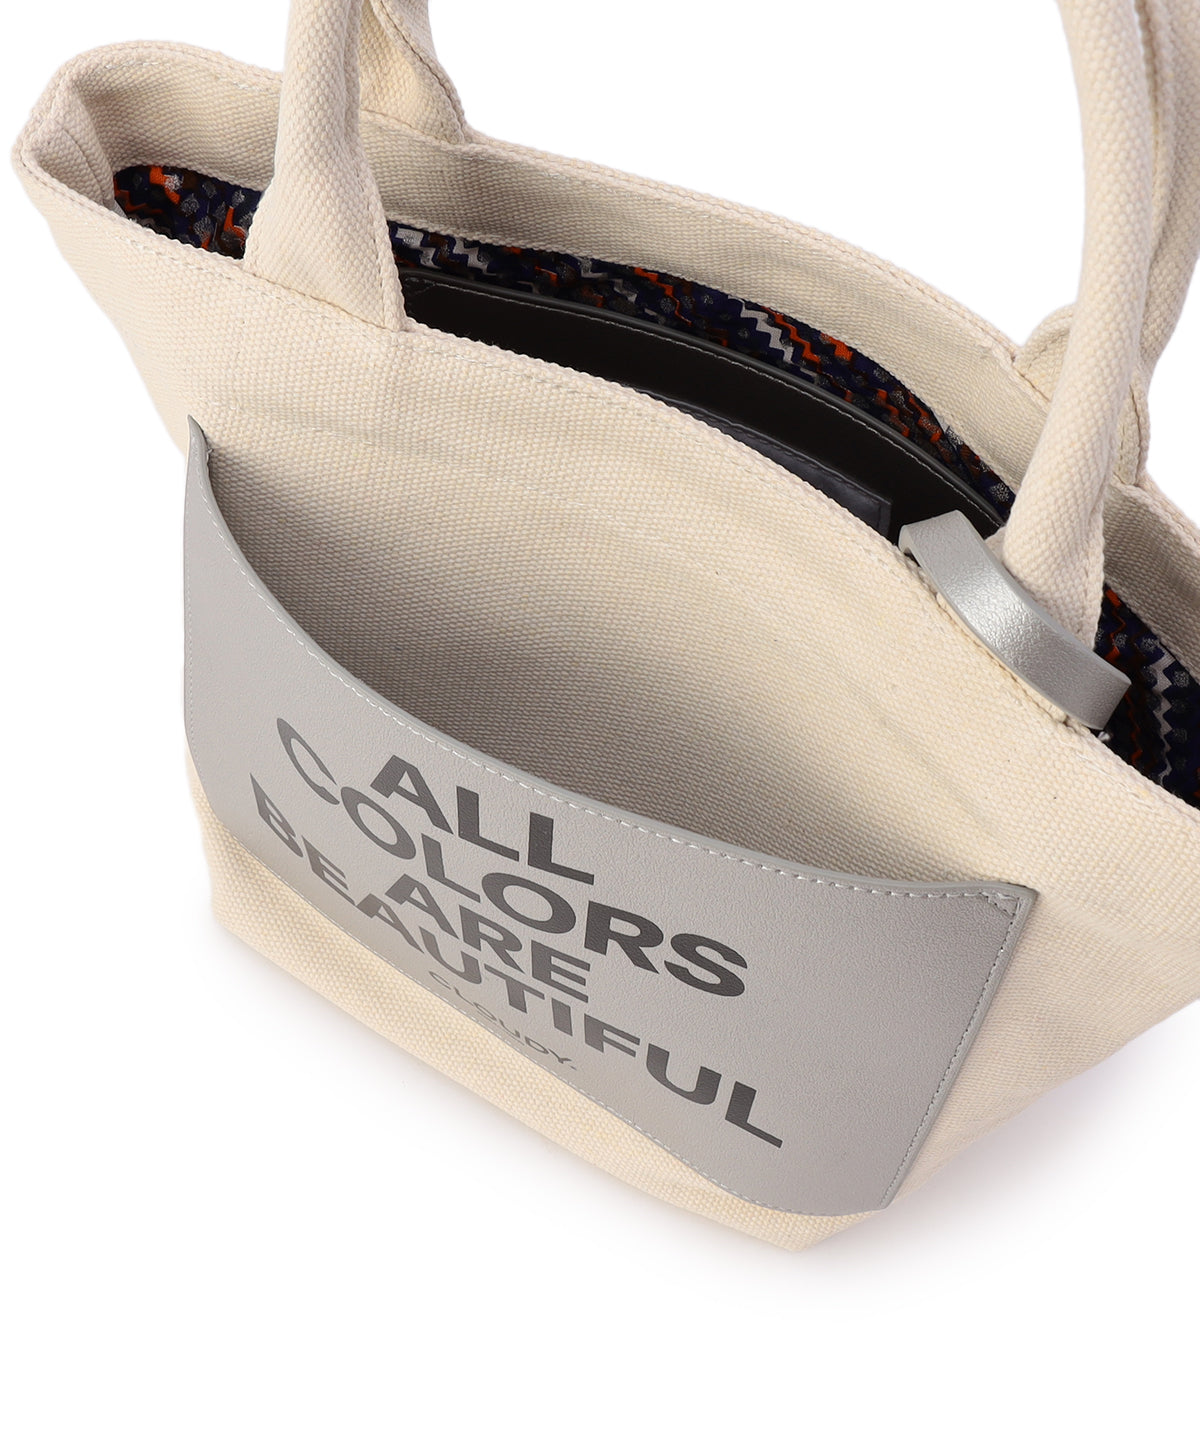 Recycled Canvas Tote (Small )SILVER